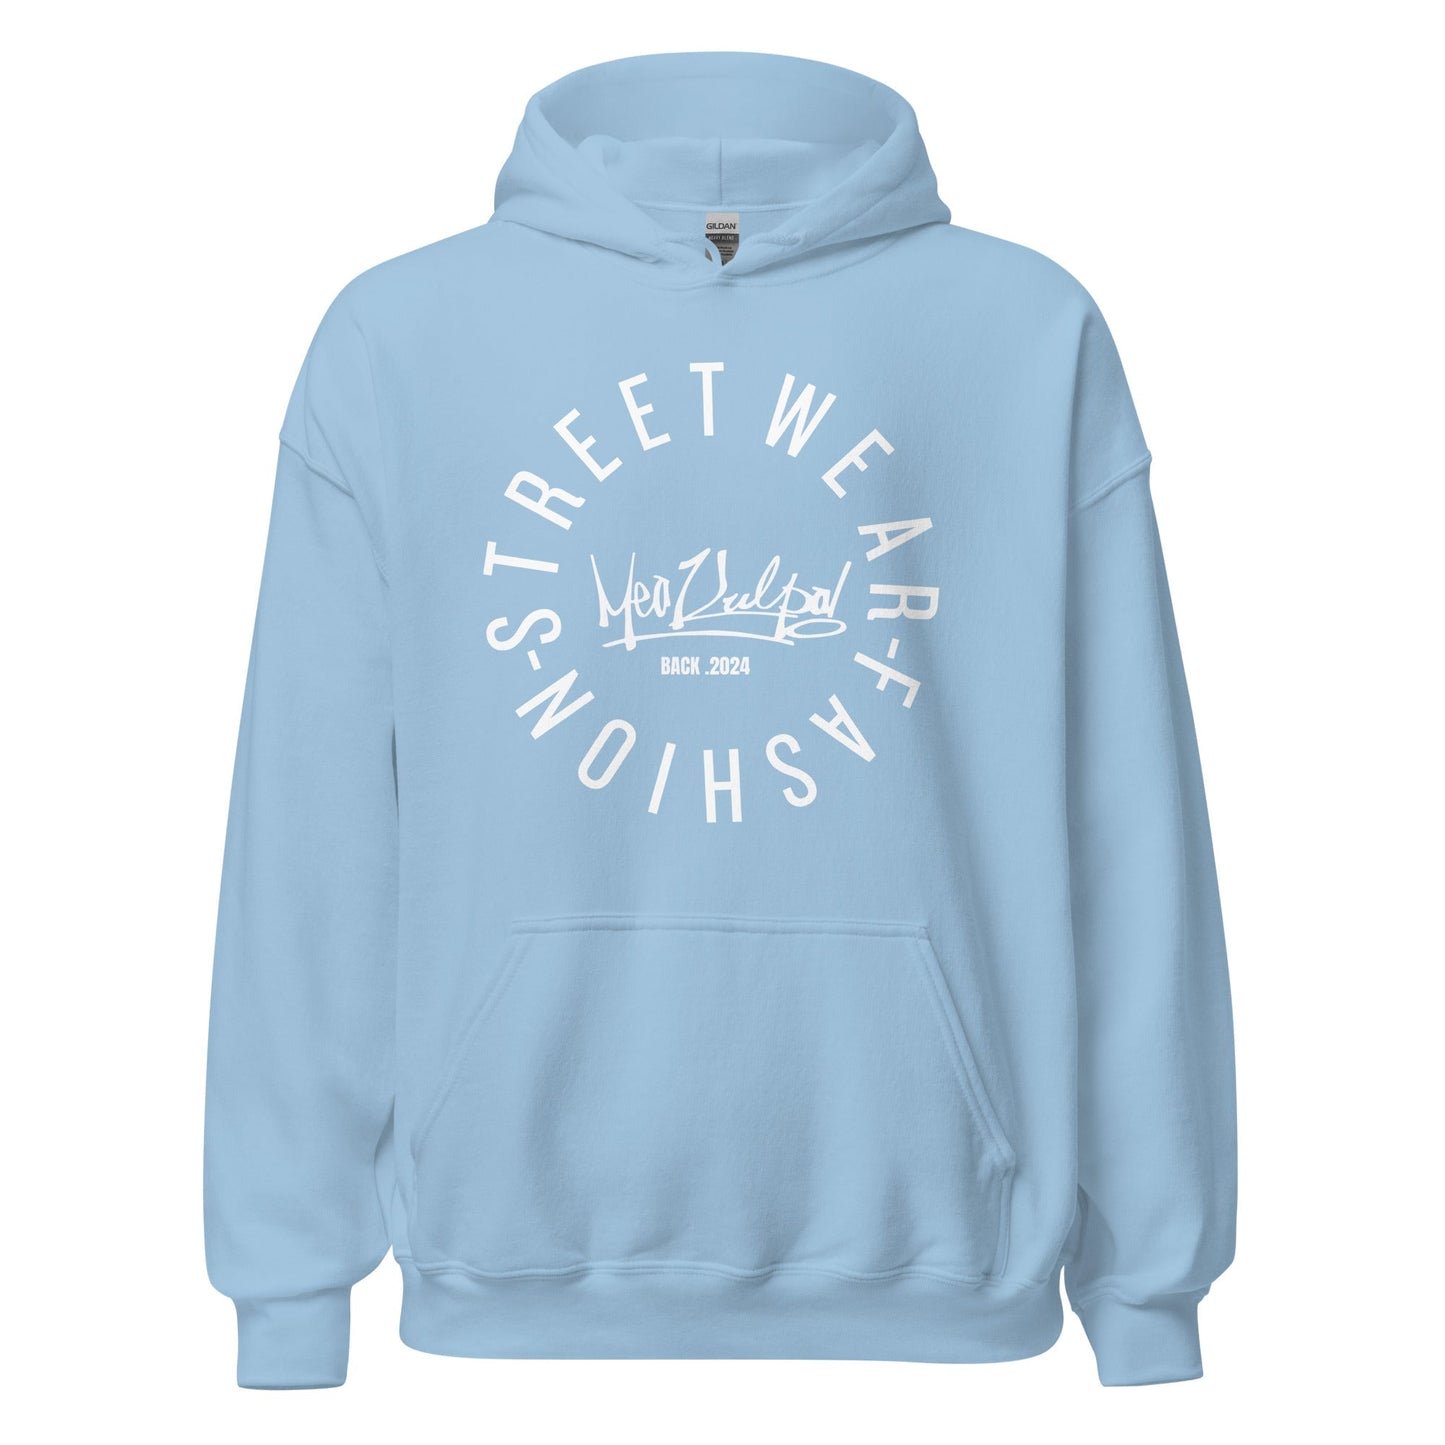 Channel laid-back vibes with the MeaKulpa Street Wear Fashion Hoodie in Light Blue. Made from soft, breathable fabric, this hoodie is perfect for everyday wear. Its relaxed fit and soothing blue hue make it the ultimate loungewear essential. Whether you're running errands or relaxing at home, this light blue hoodie keeps you cozy and stylish all day long.